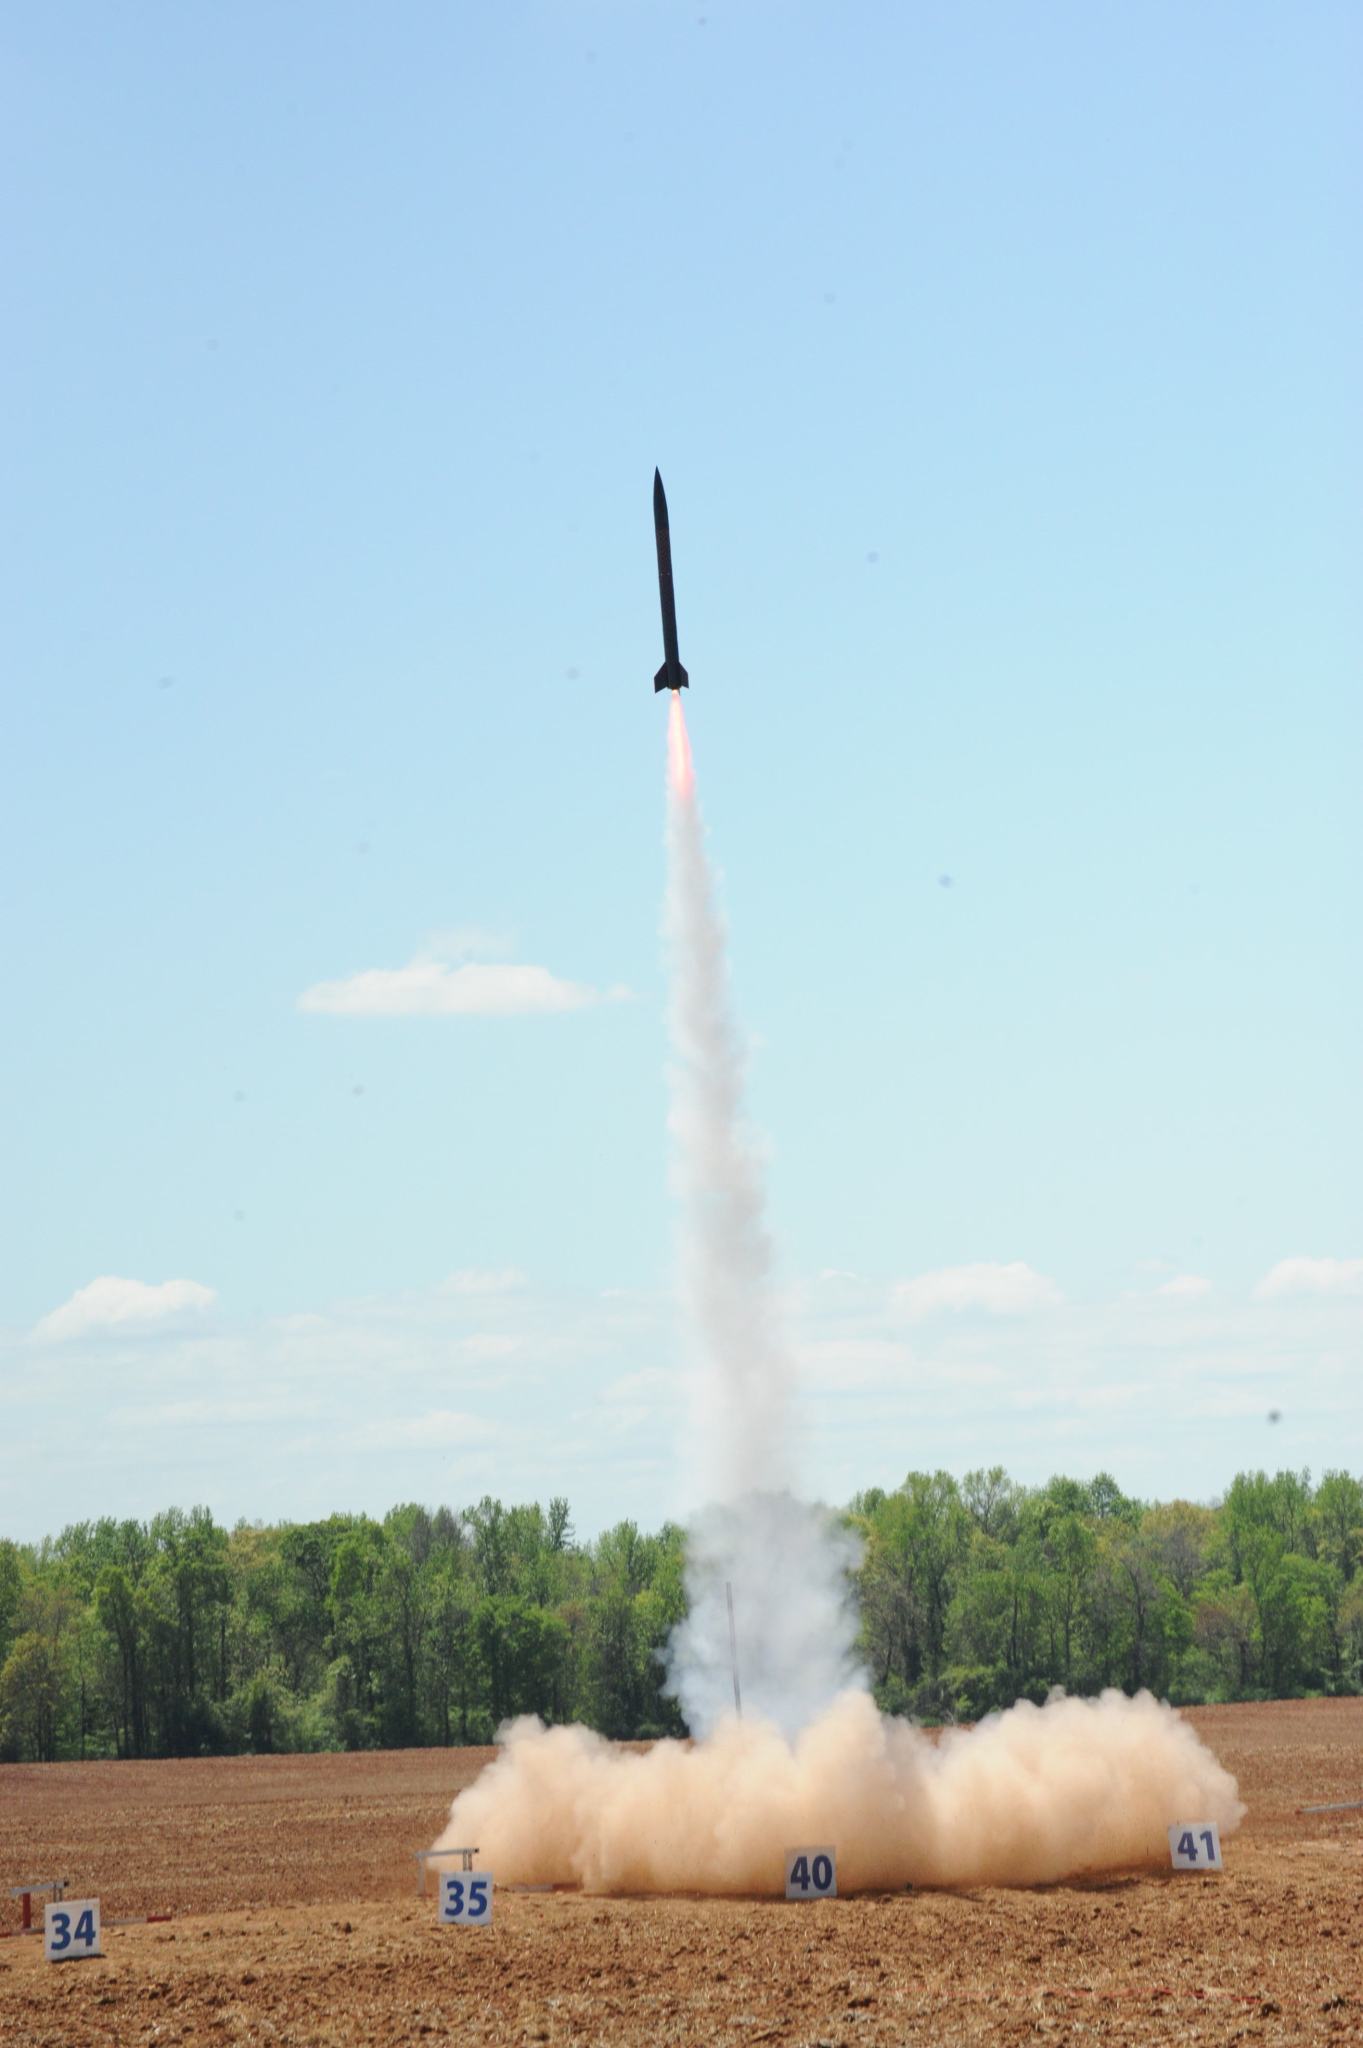 The University of Cincinnati in Ohio launches its rocket during the 16th annual Student Launch challenge.